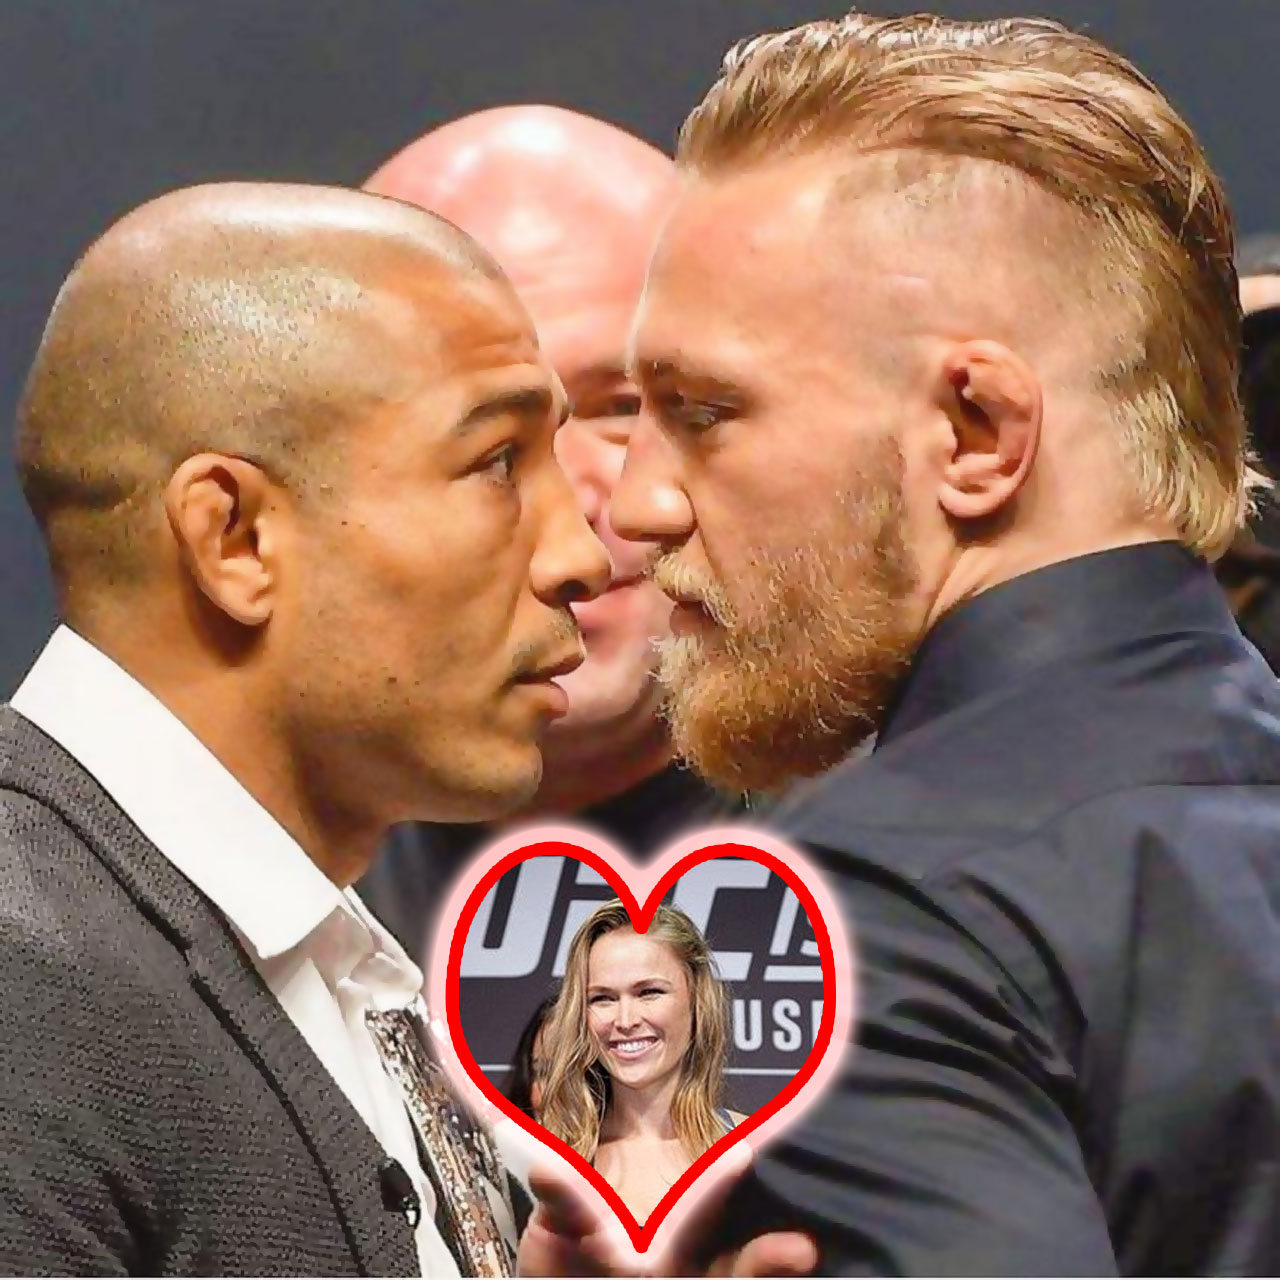 Conor McGregor and Ronda Rousey keep UFC in the headlines1280 x 1280